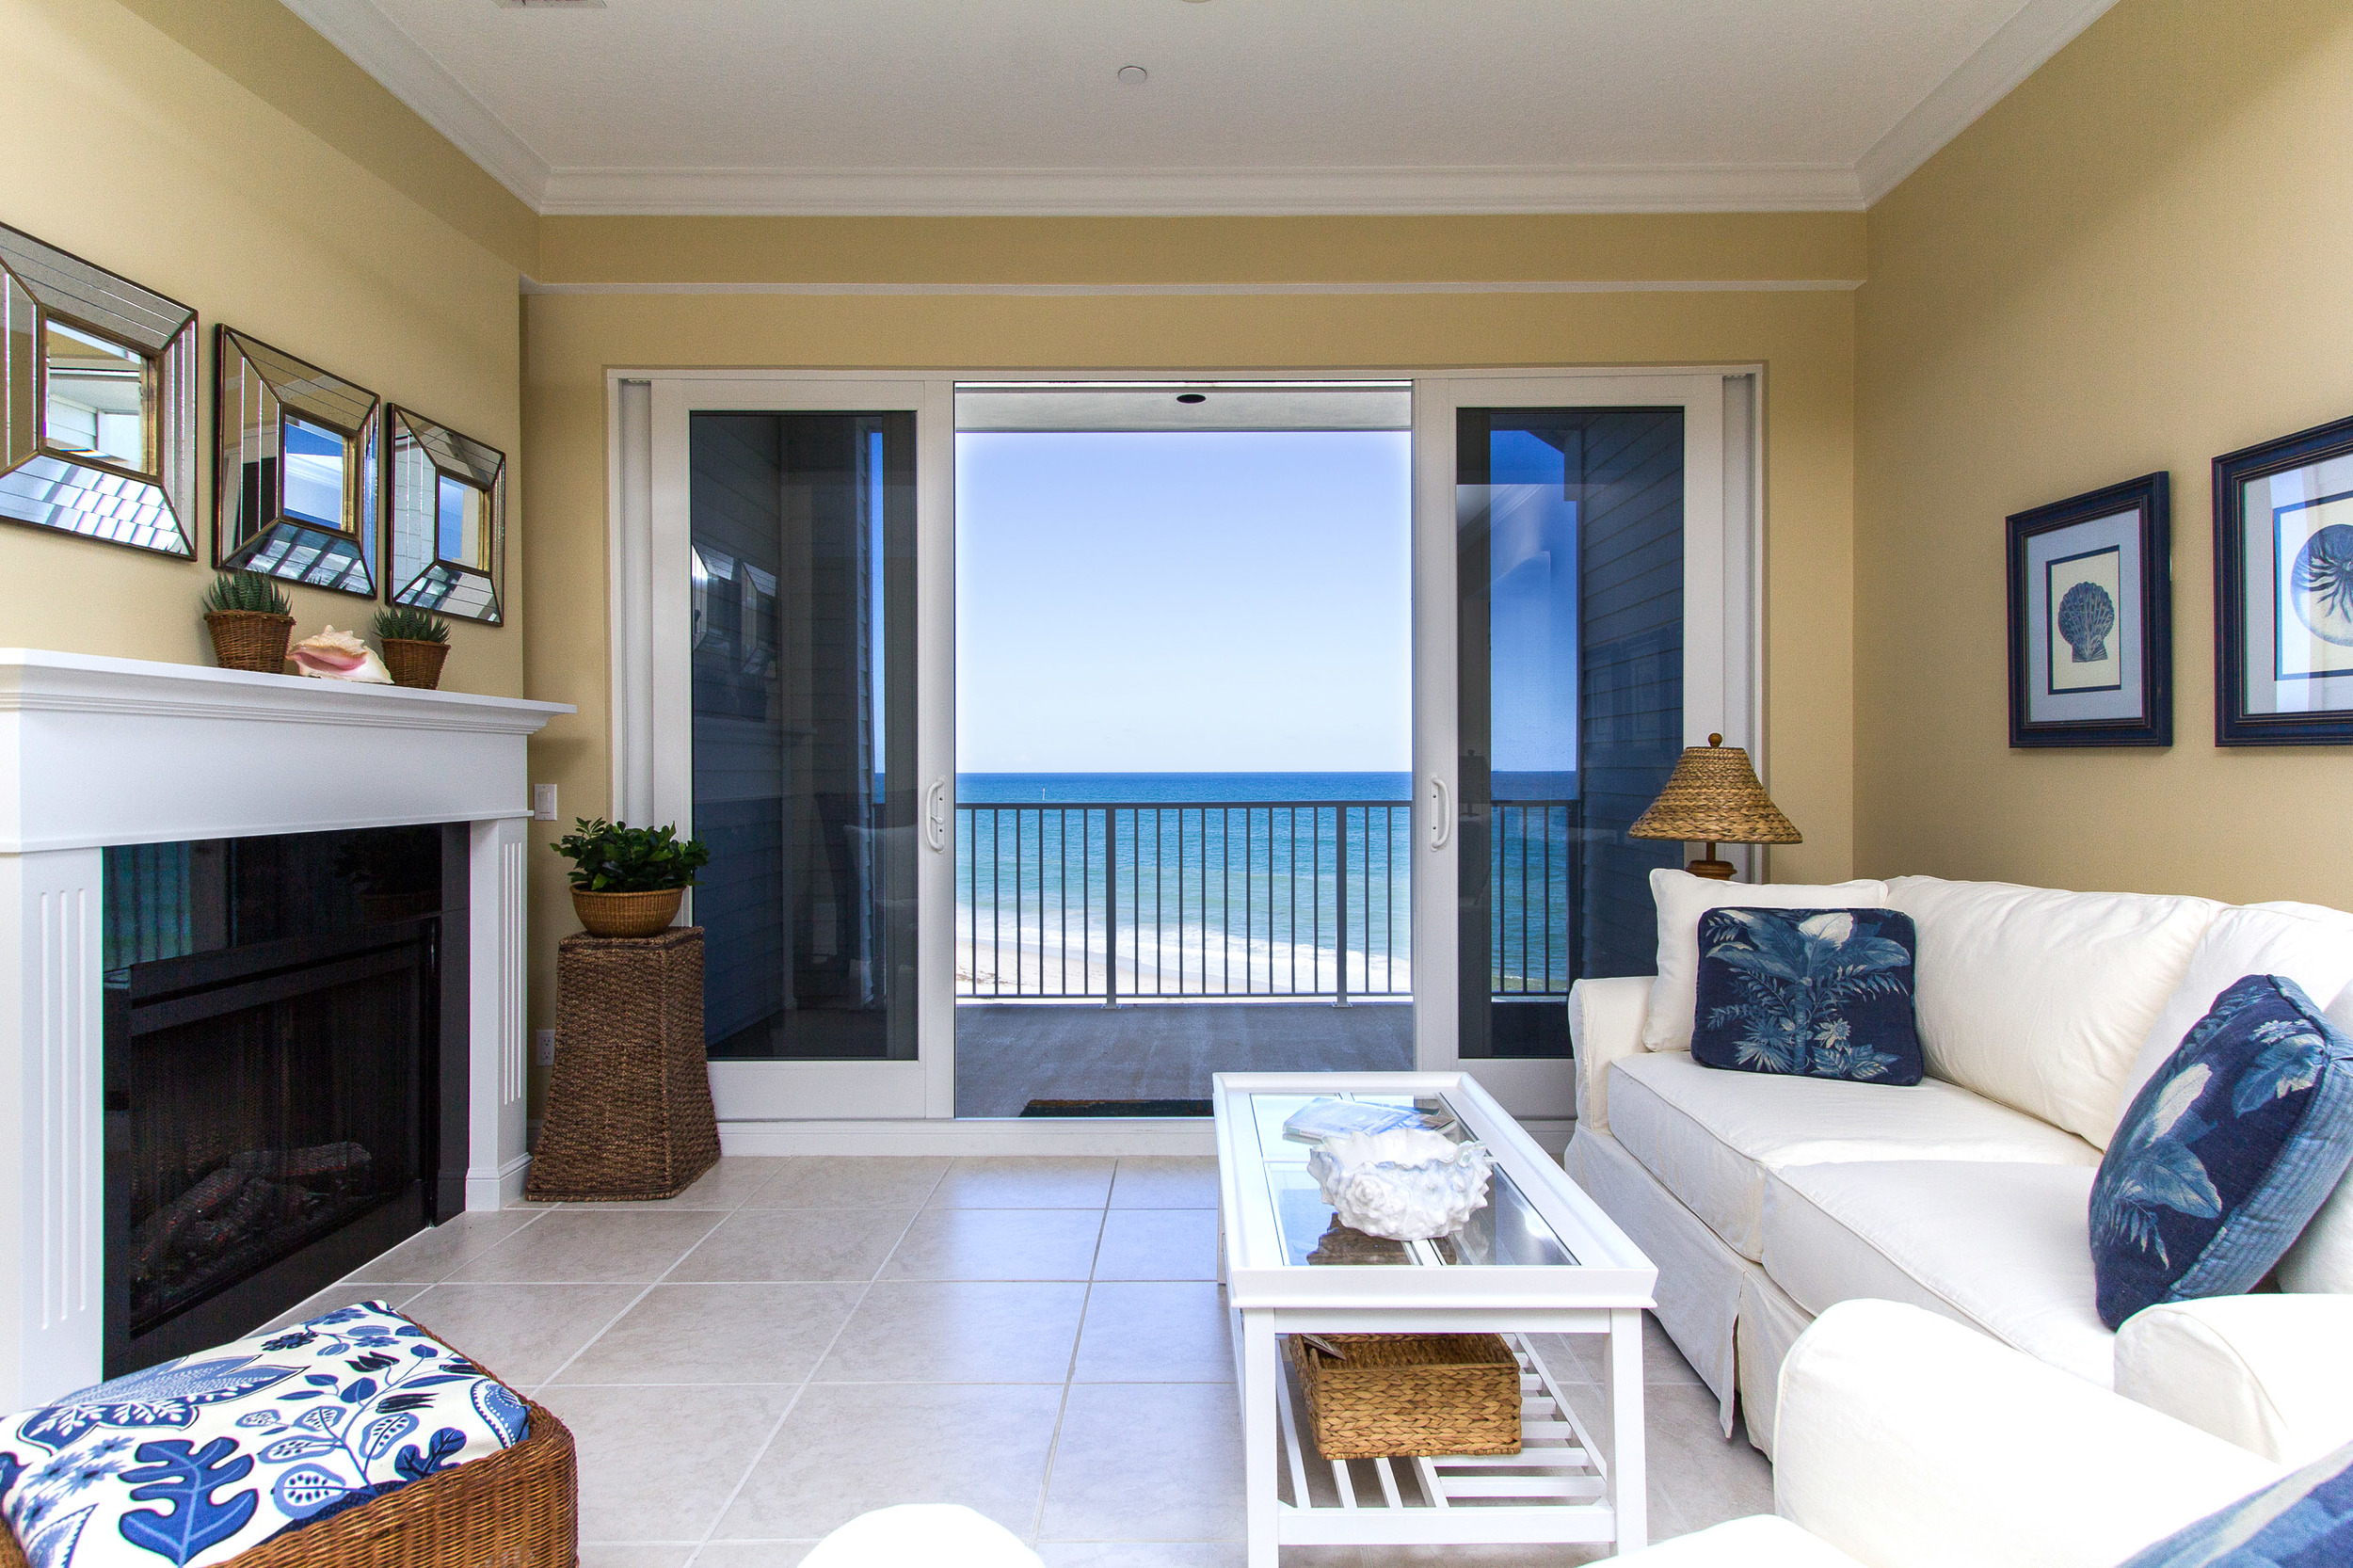 Living Room features see through fireplace and glass sliding doors opening to an oceanfront balcony